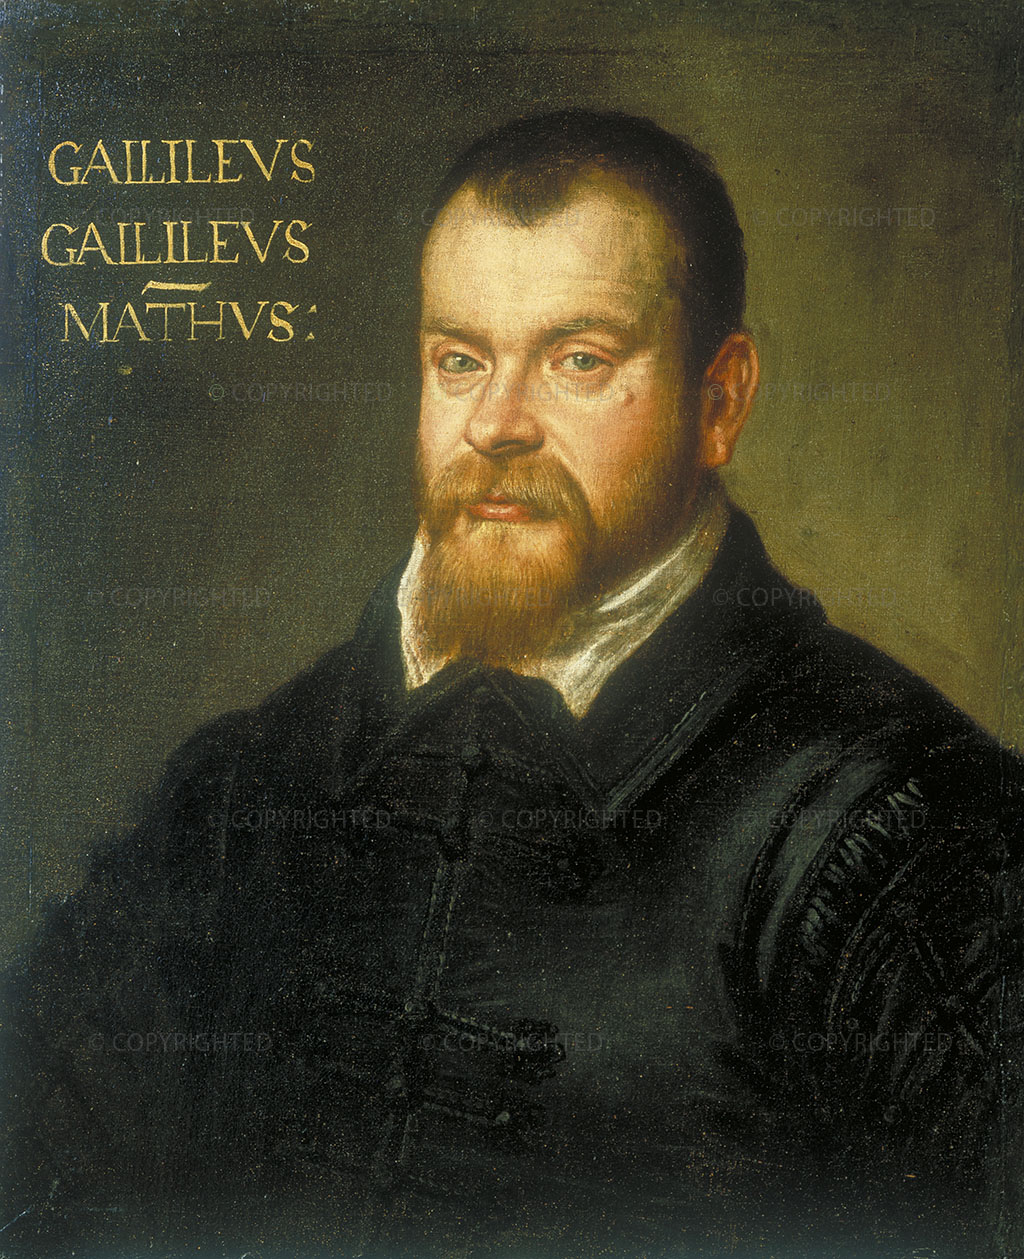 1605 – 1606, Oil on canvas, cm 66 x 53.5, Greenwich, National Maritime Museum, Inv. BHC2699